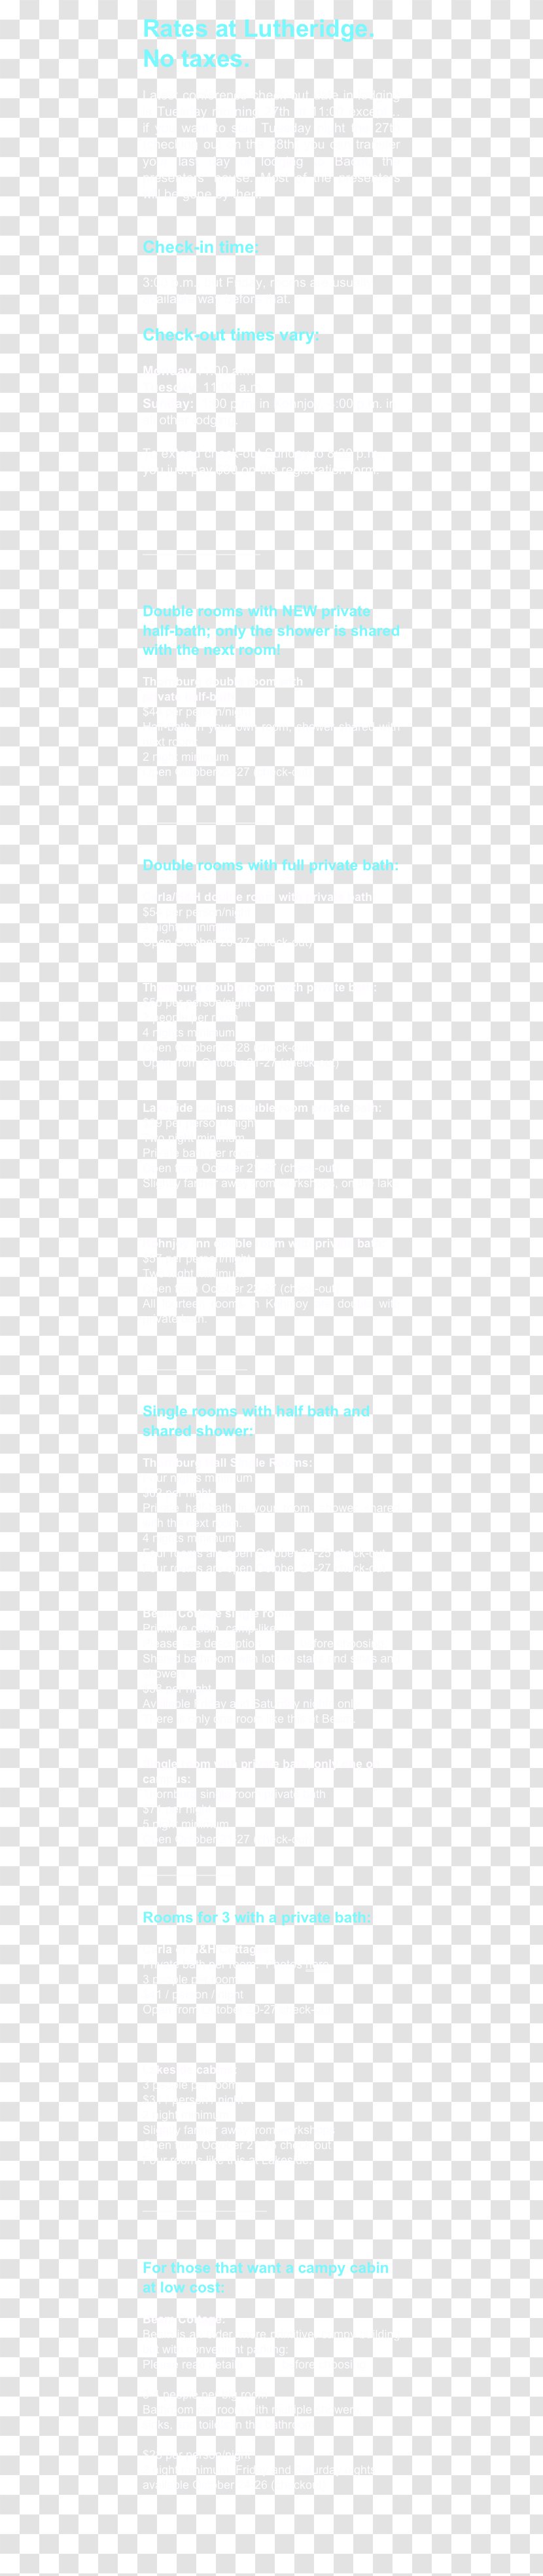 Document Line Angle Turquoise Sky Plc - Rectangle - Southeastern Conference Transparent PNG